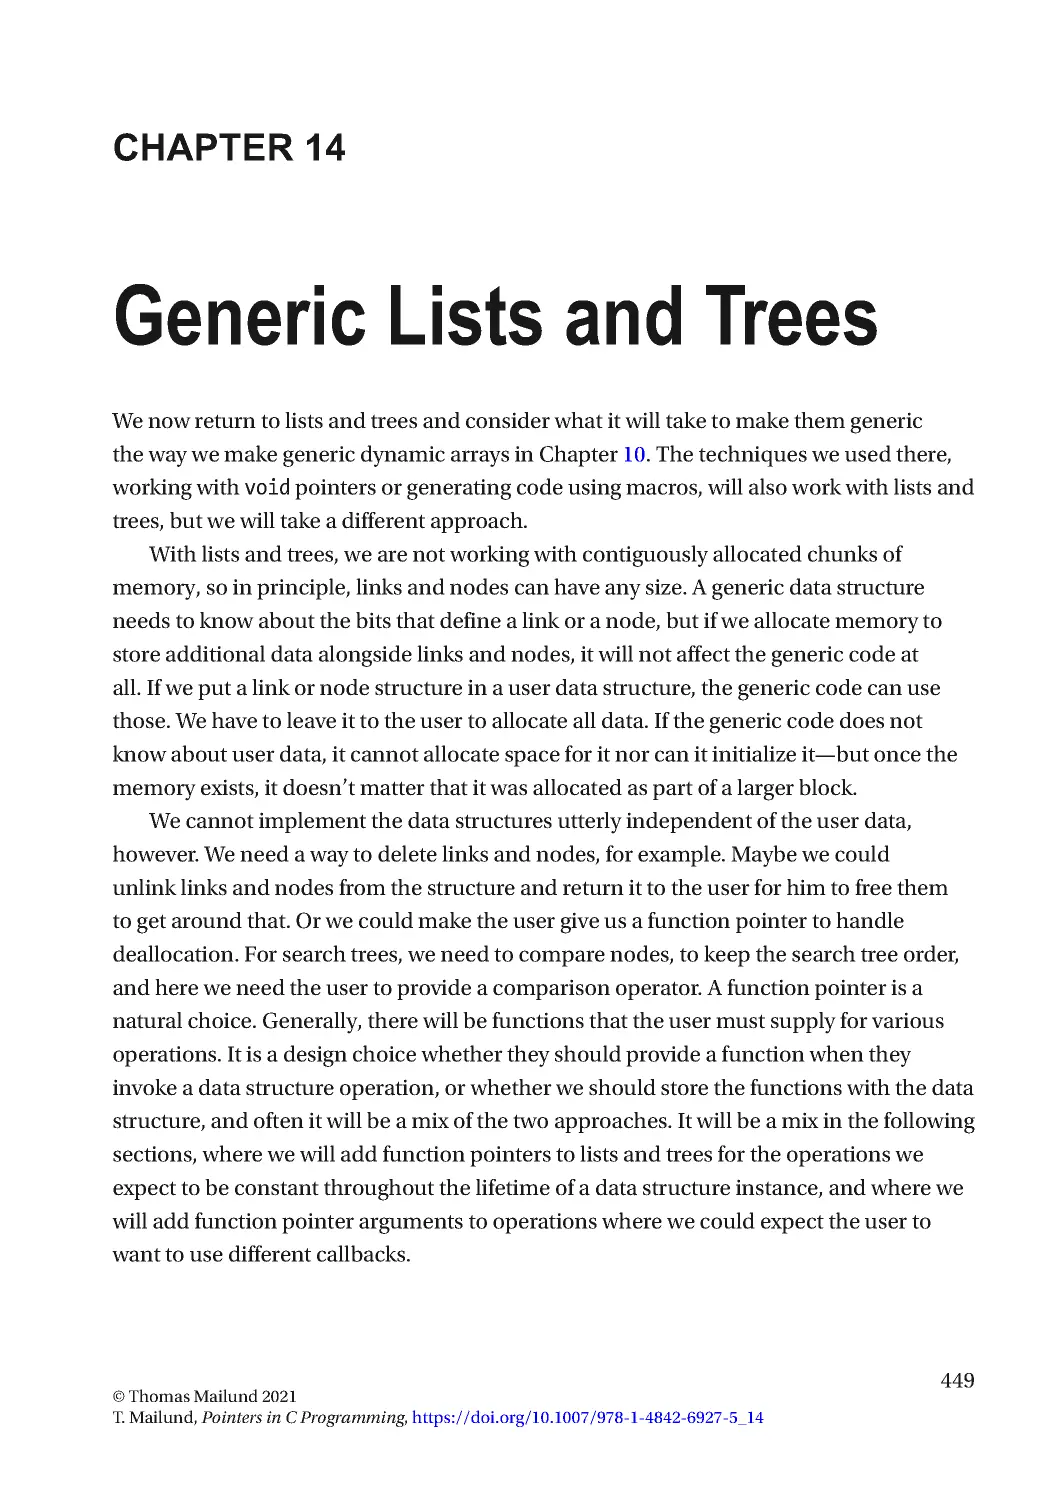 Chapter 14: Generic Lists and Trees